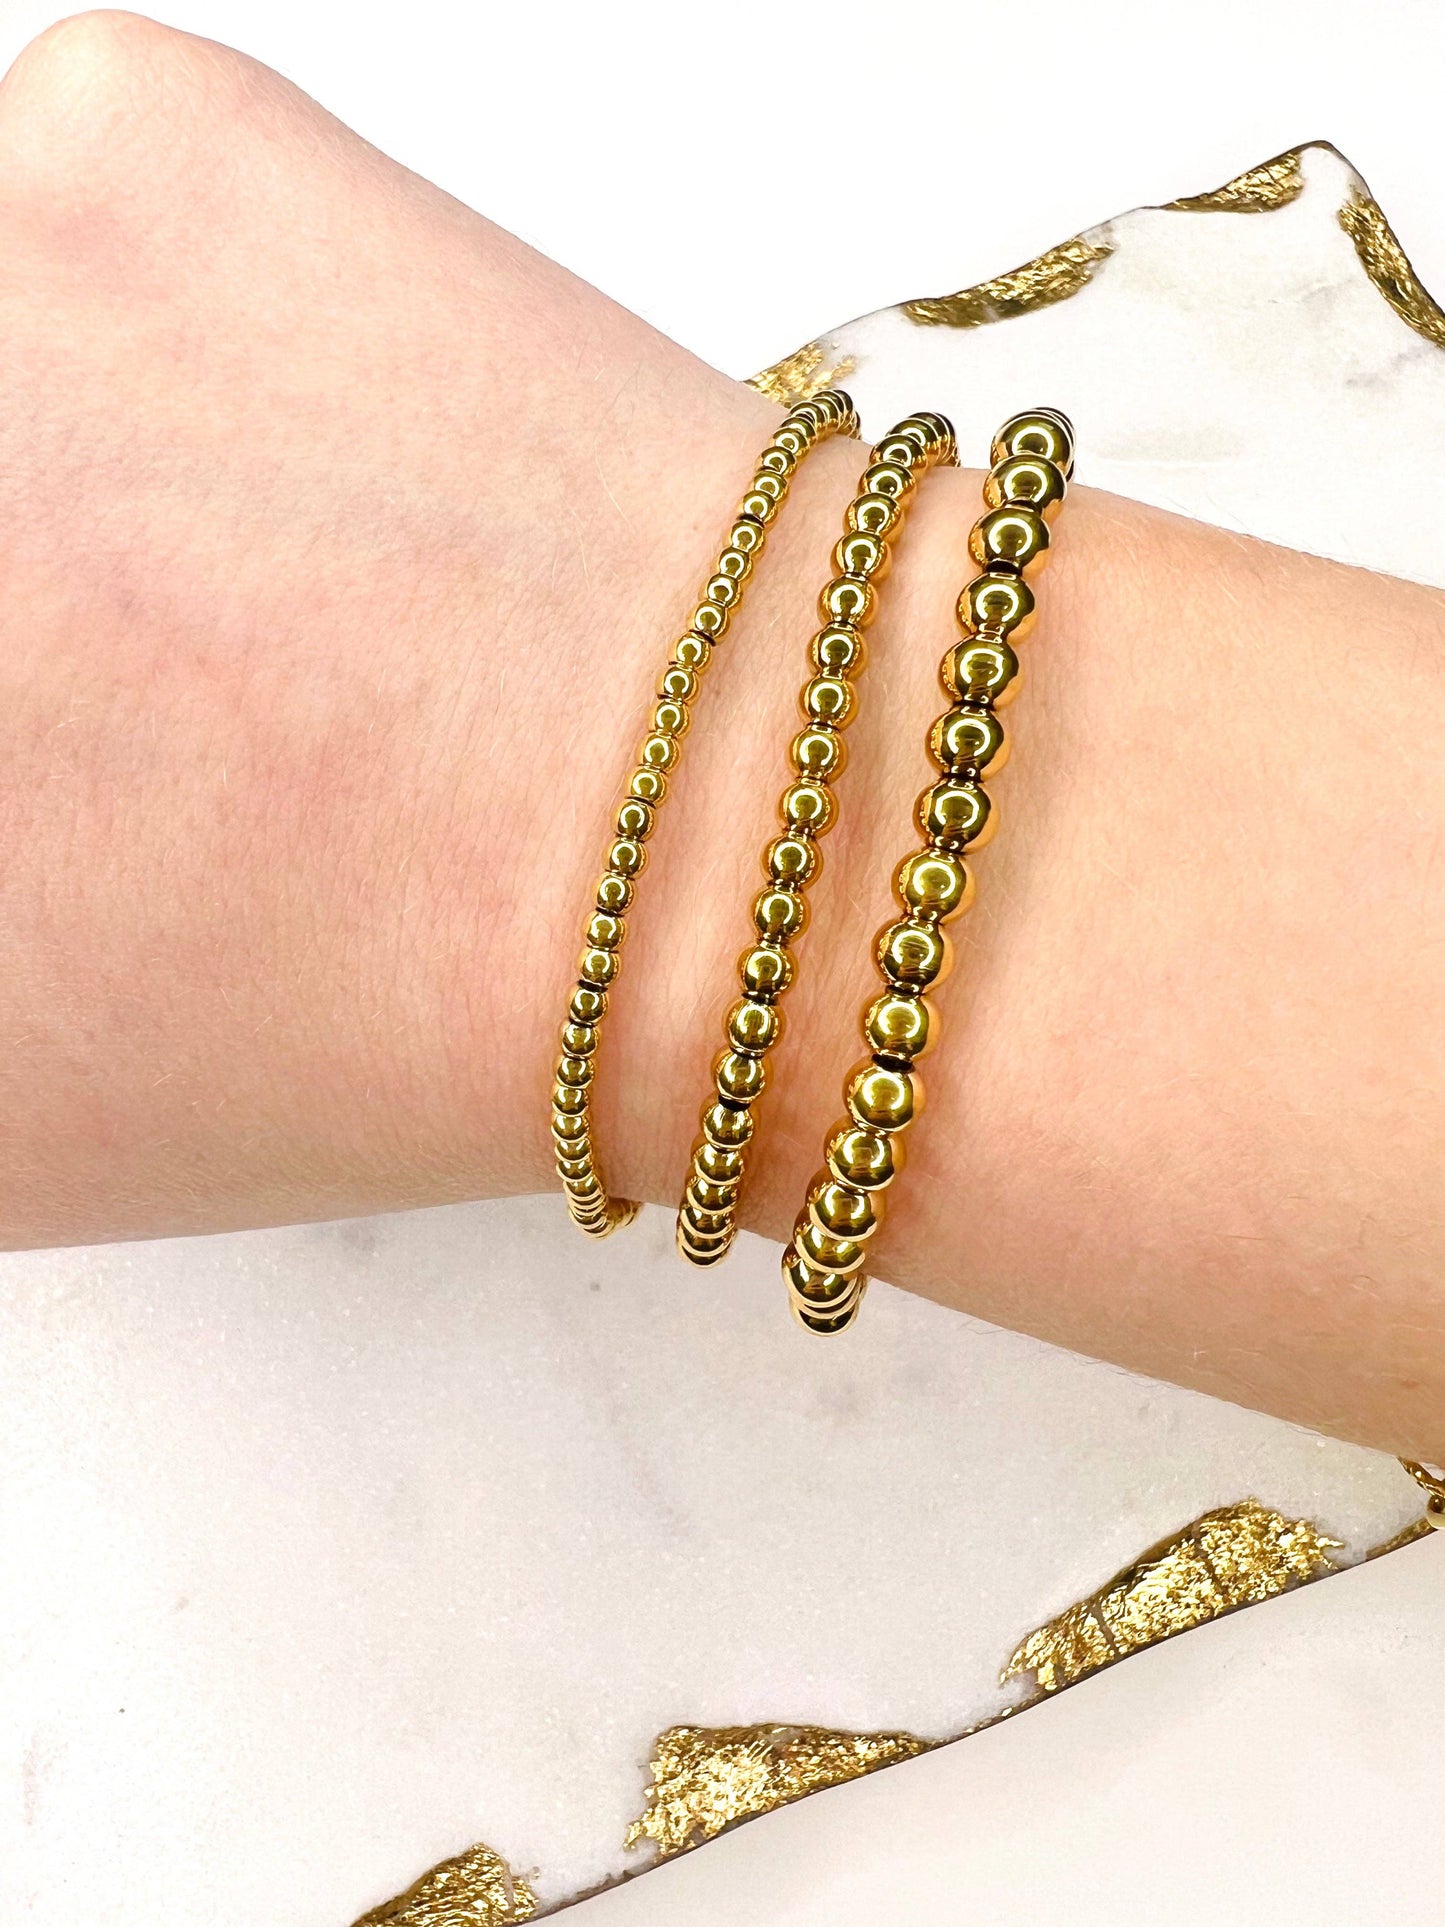 Three Kyra Beaded Bracelet Sets from Lacey Rae Jewelry on a woman's wrist.